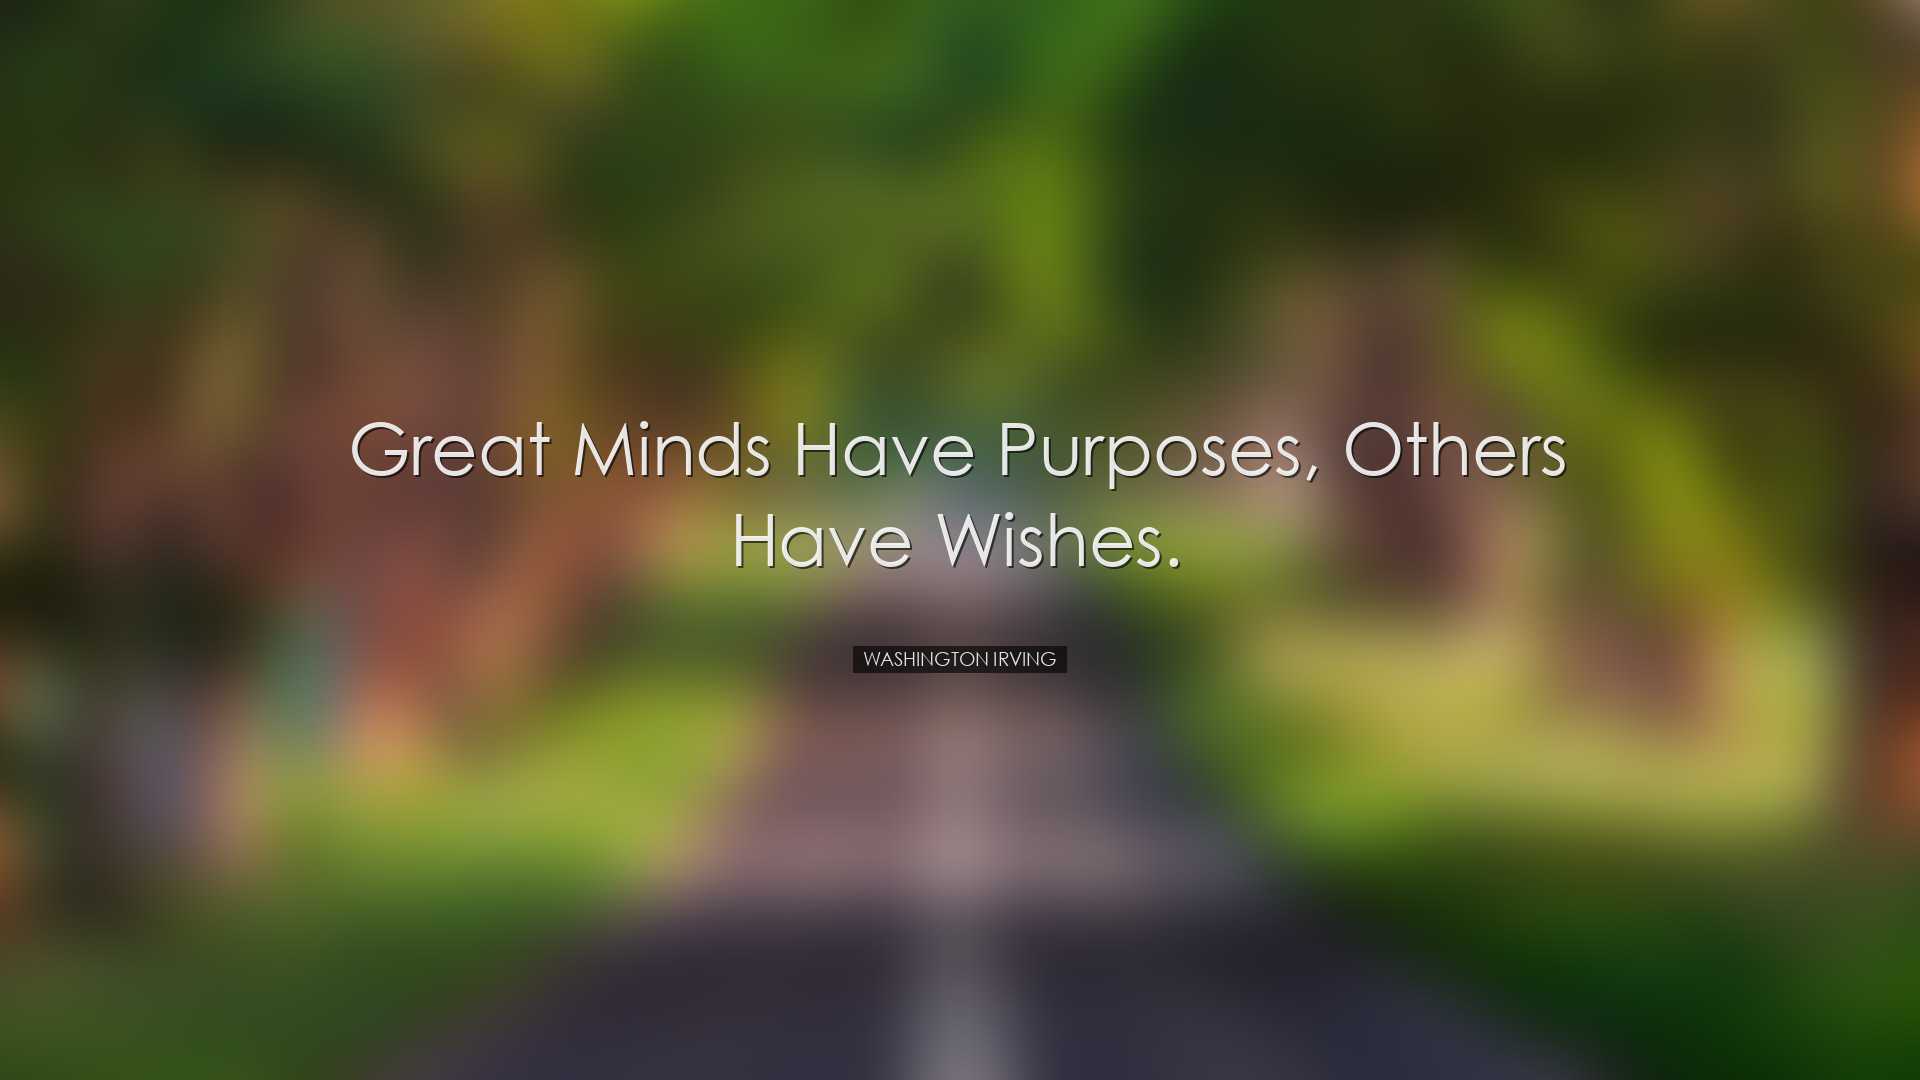 Great minds have purposes, others have wishes. - Washington Irving